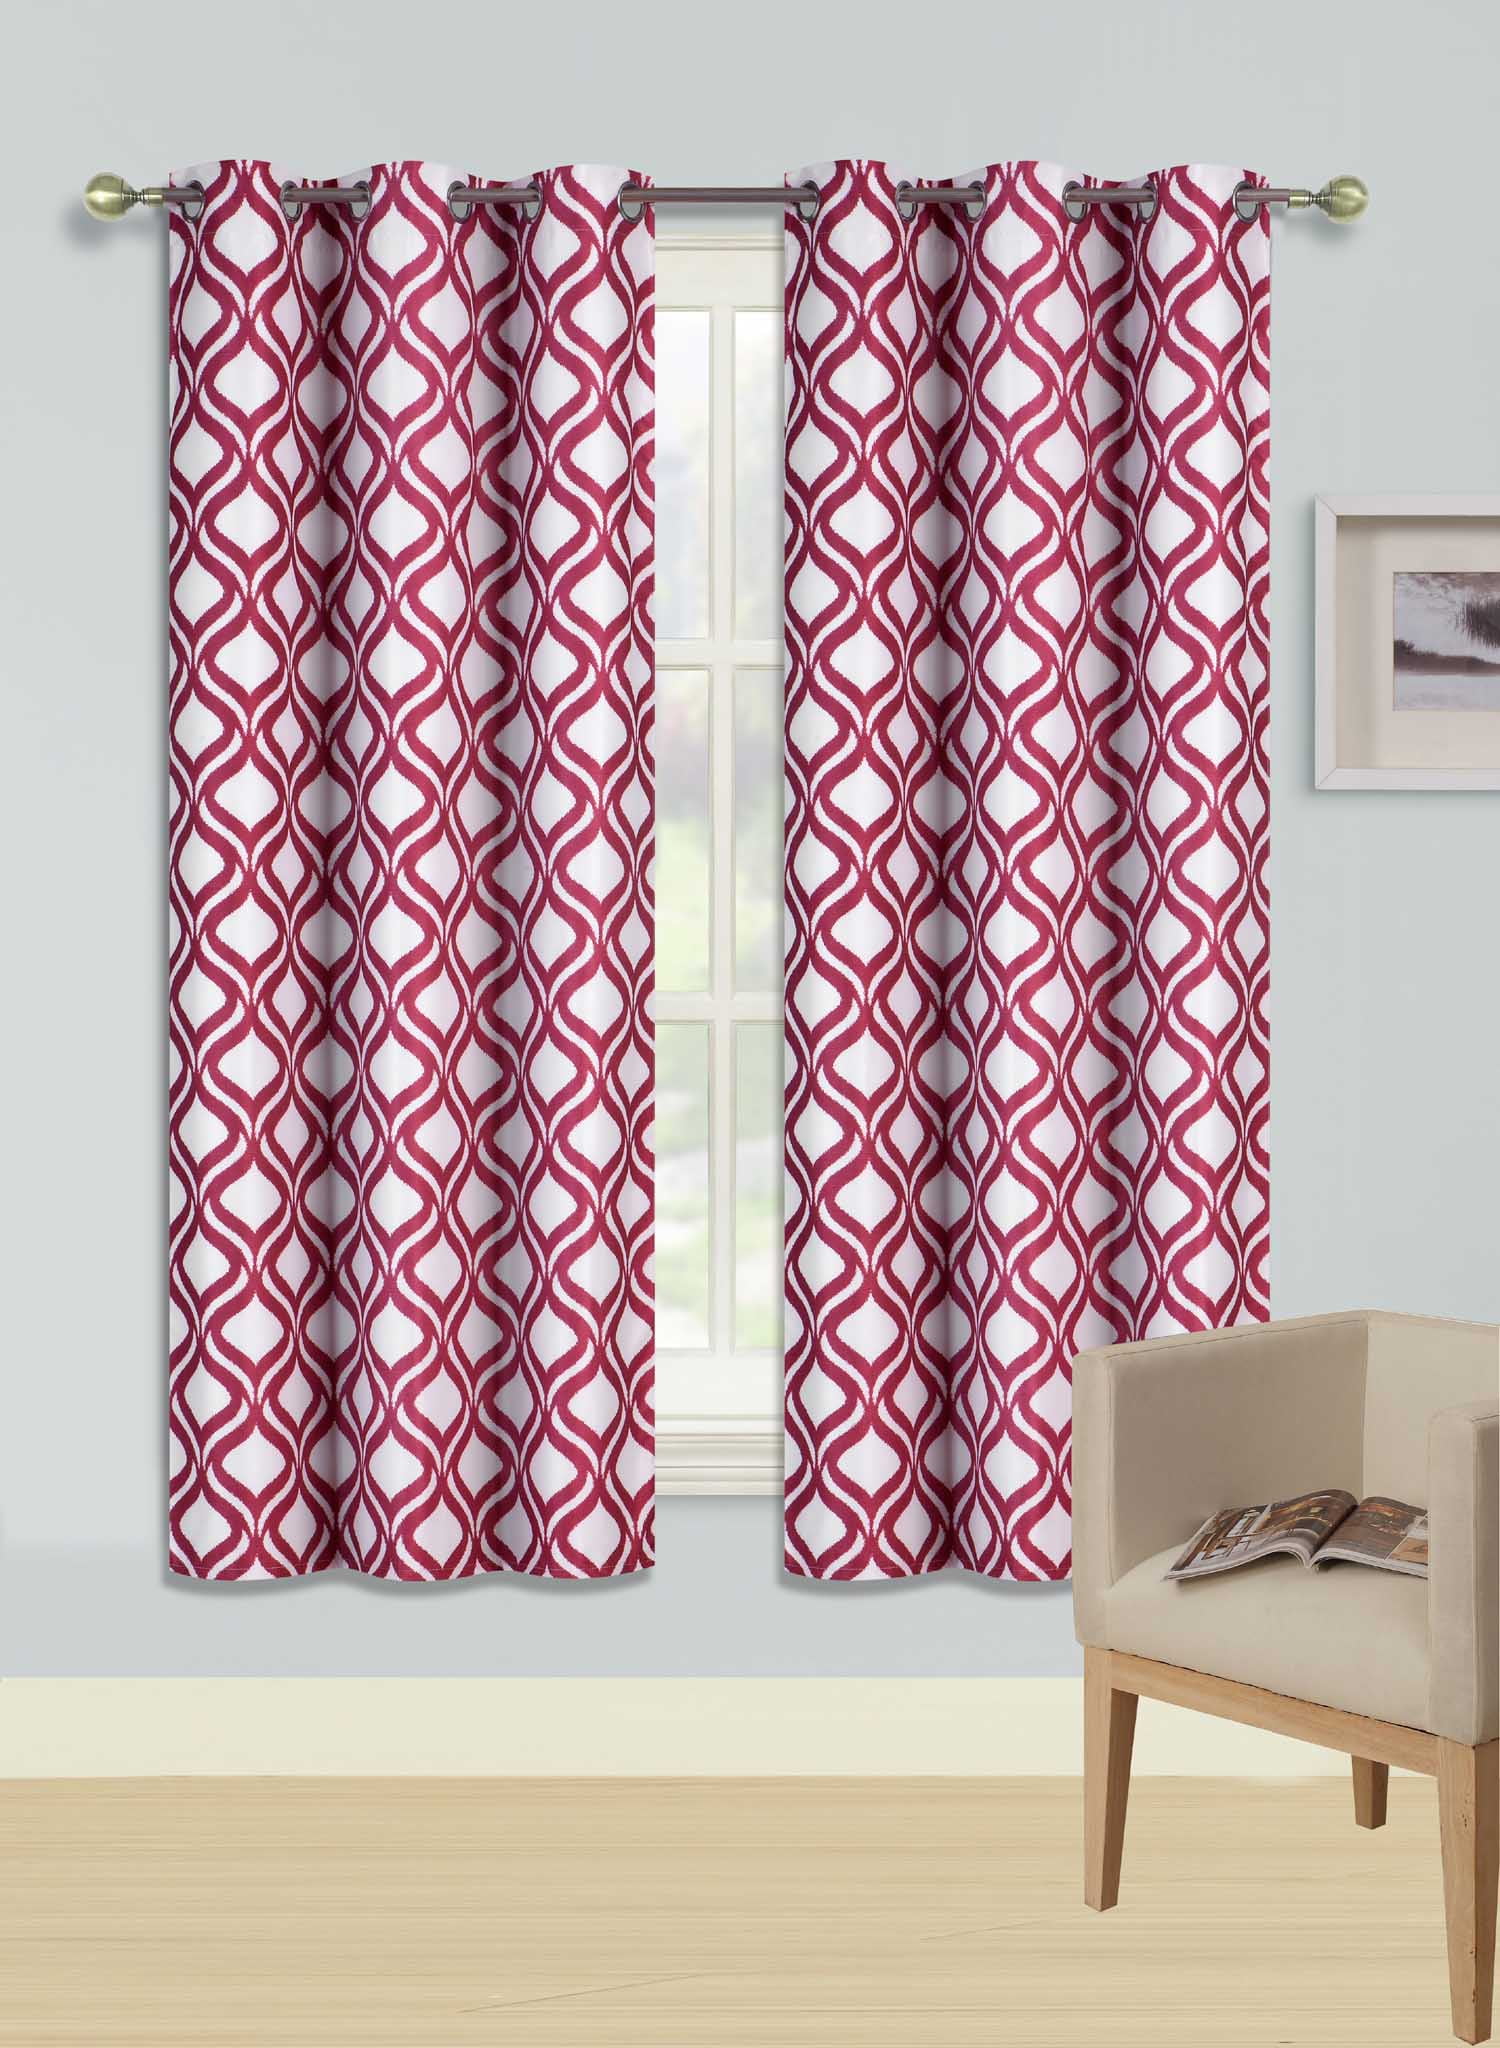 Window Curtain Lined Curtain Set And Valance Window Treatment  2 Panel Ocean